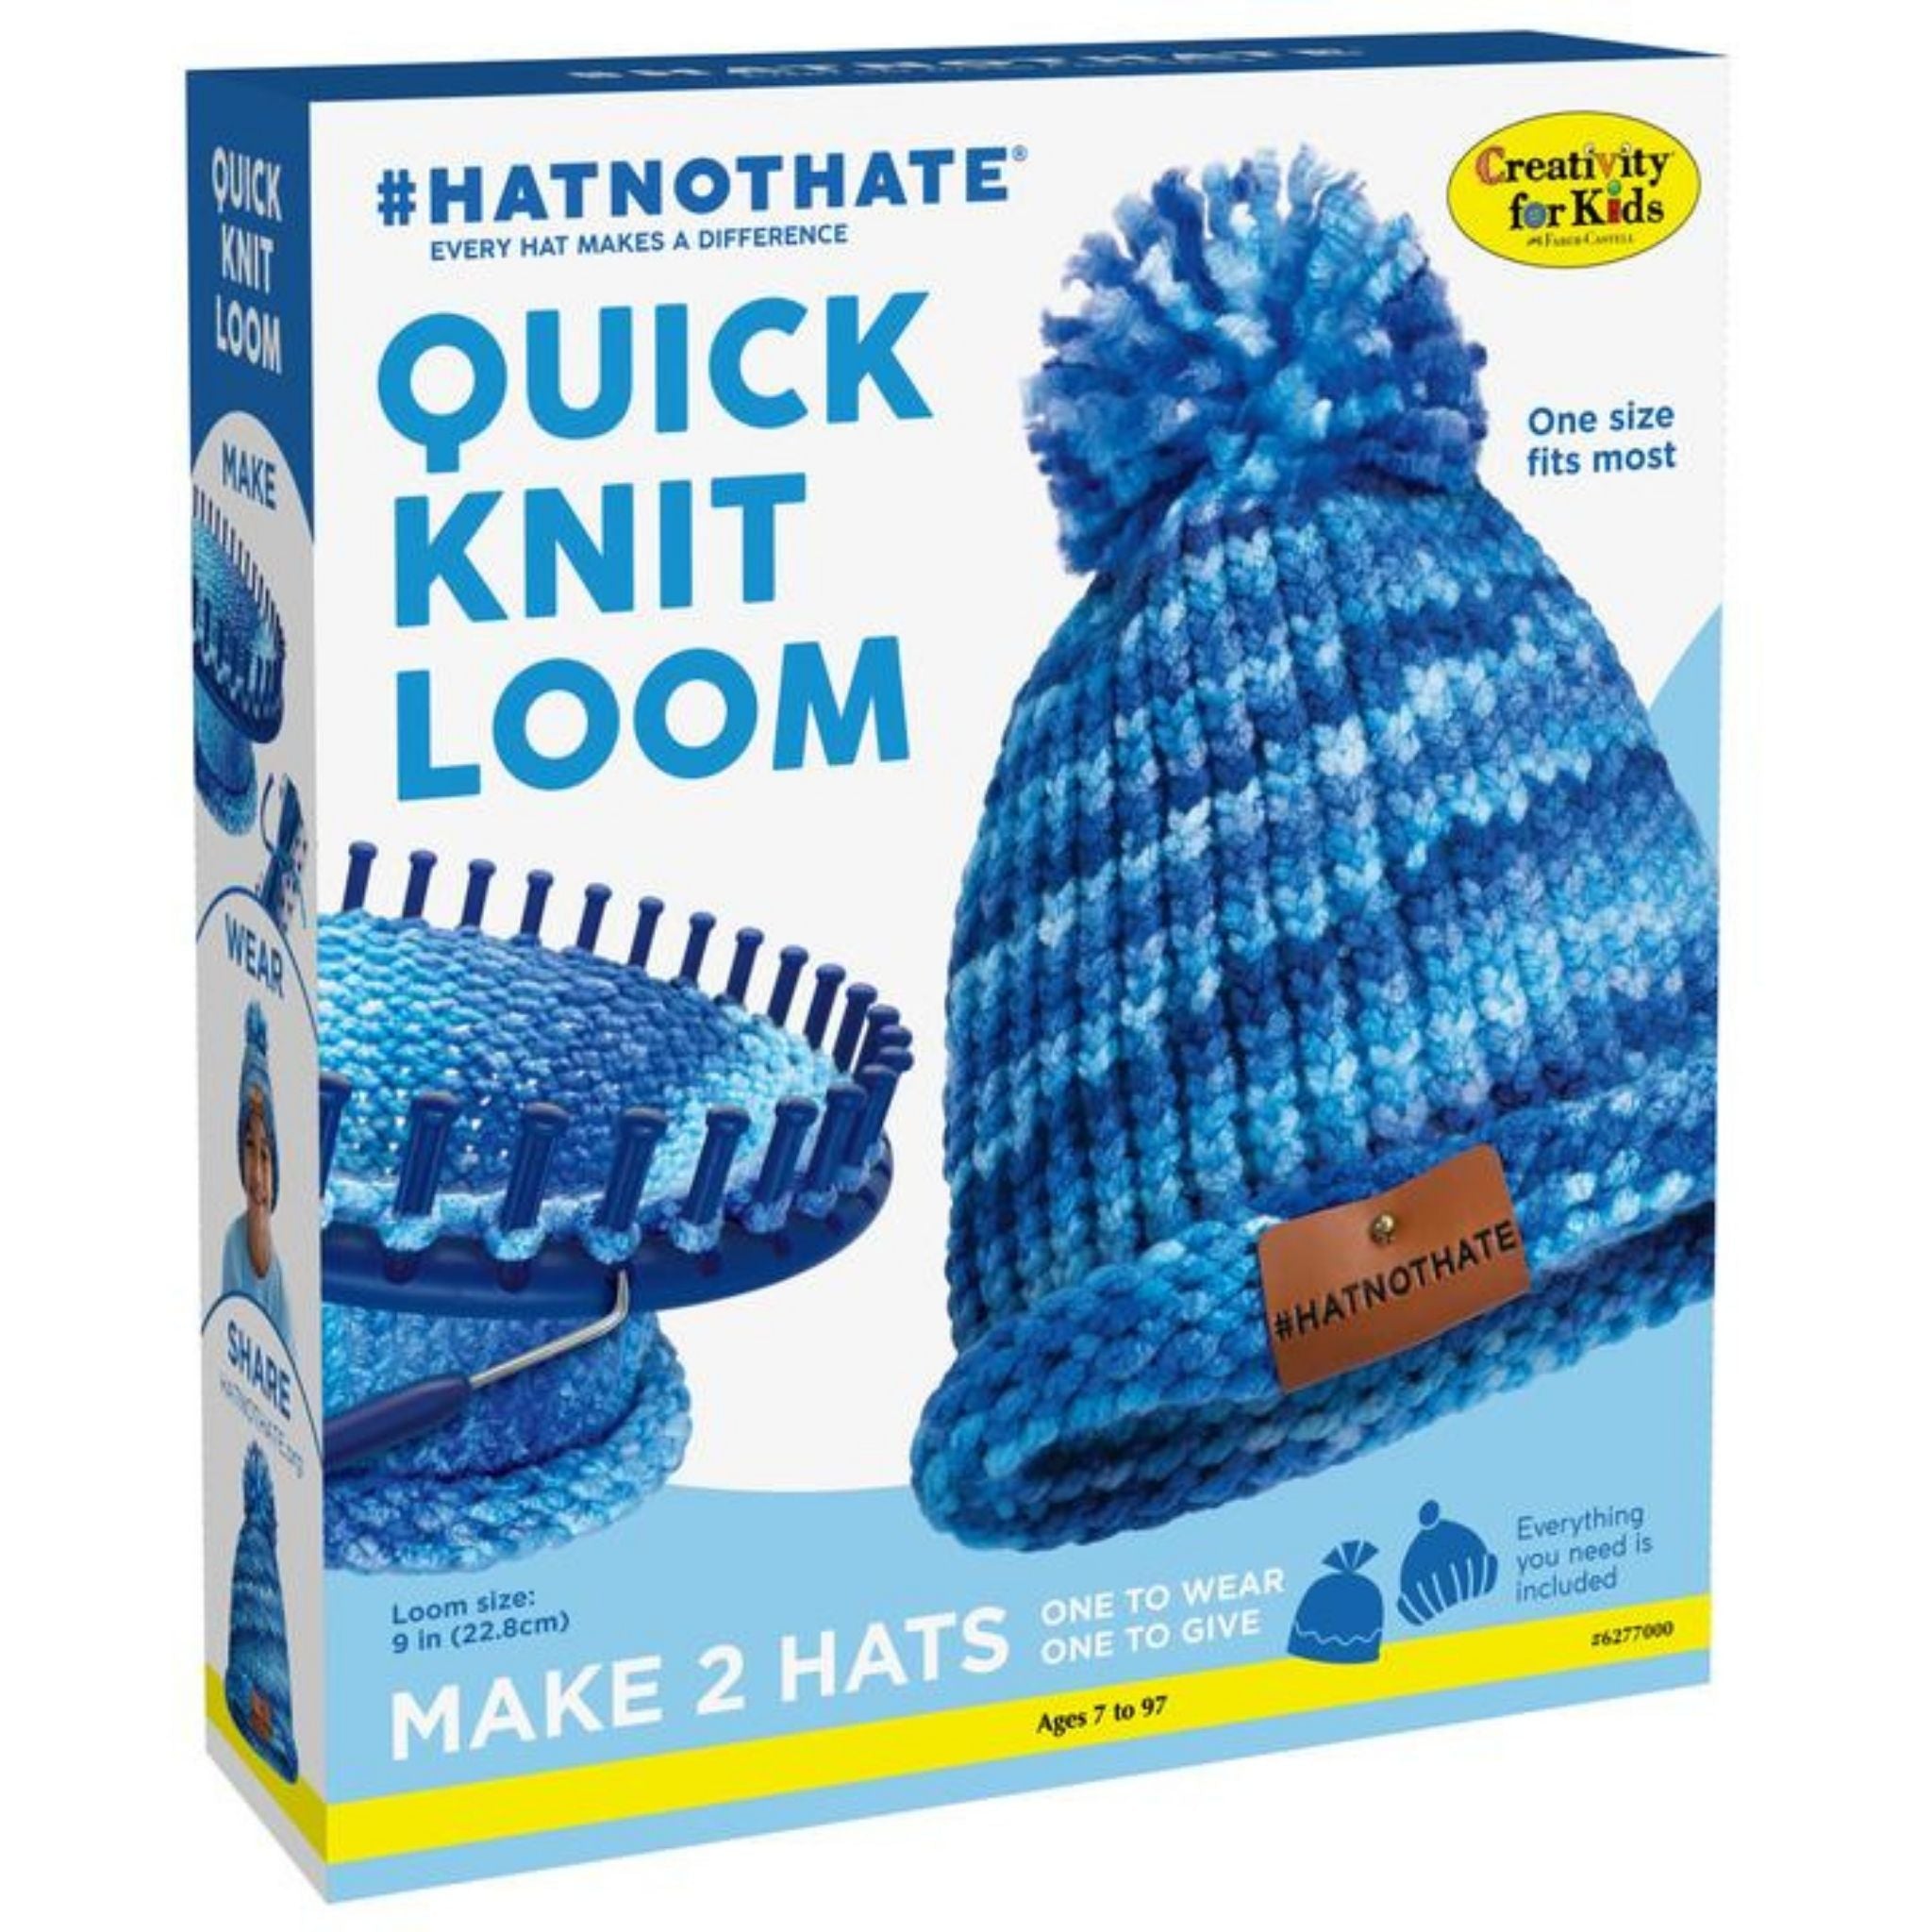 Creativity For Kids - Hat Not Hate Quick Knit Loom – Scooter Girl Toys